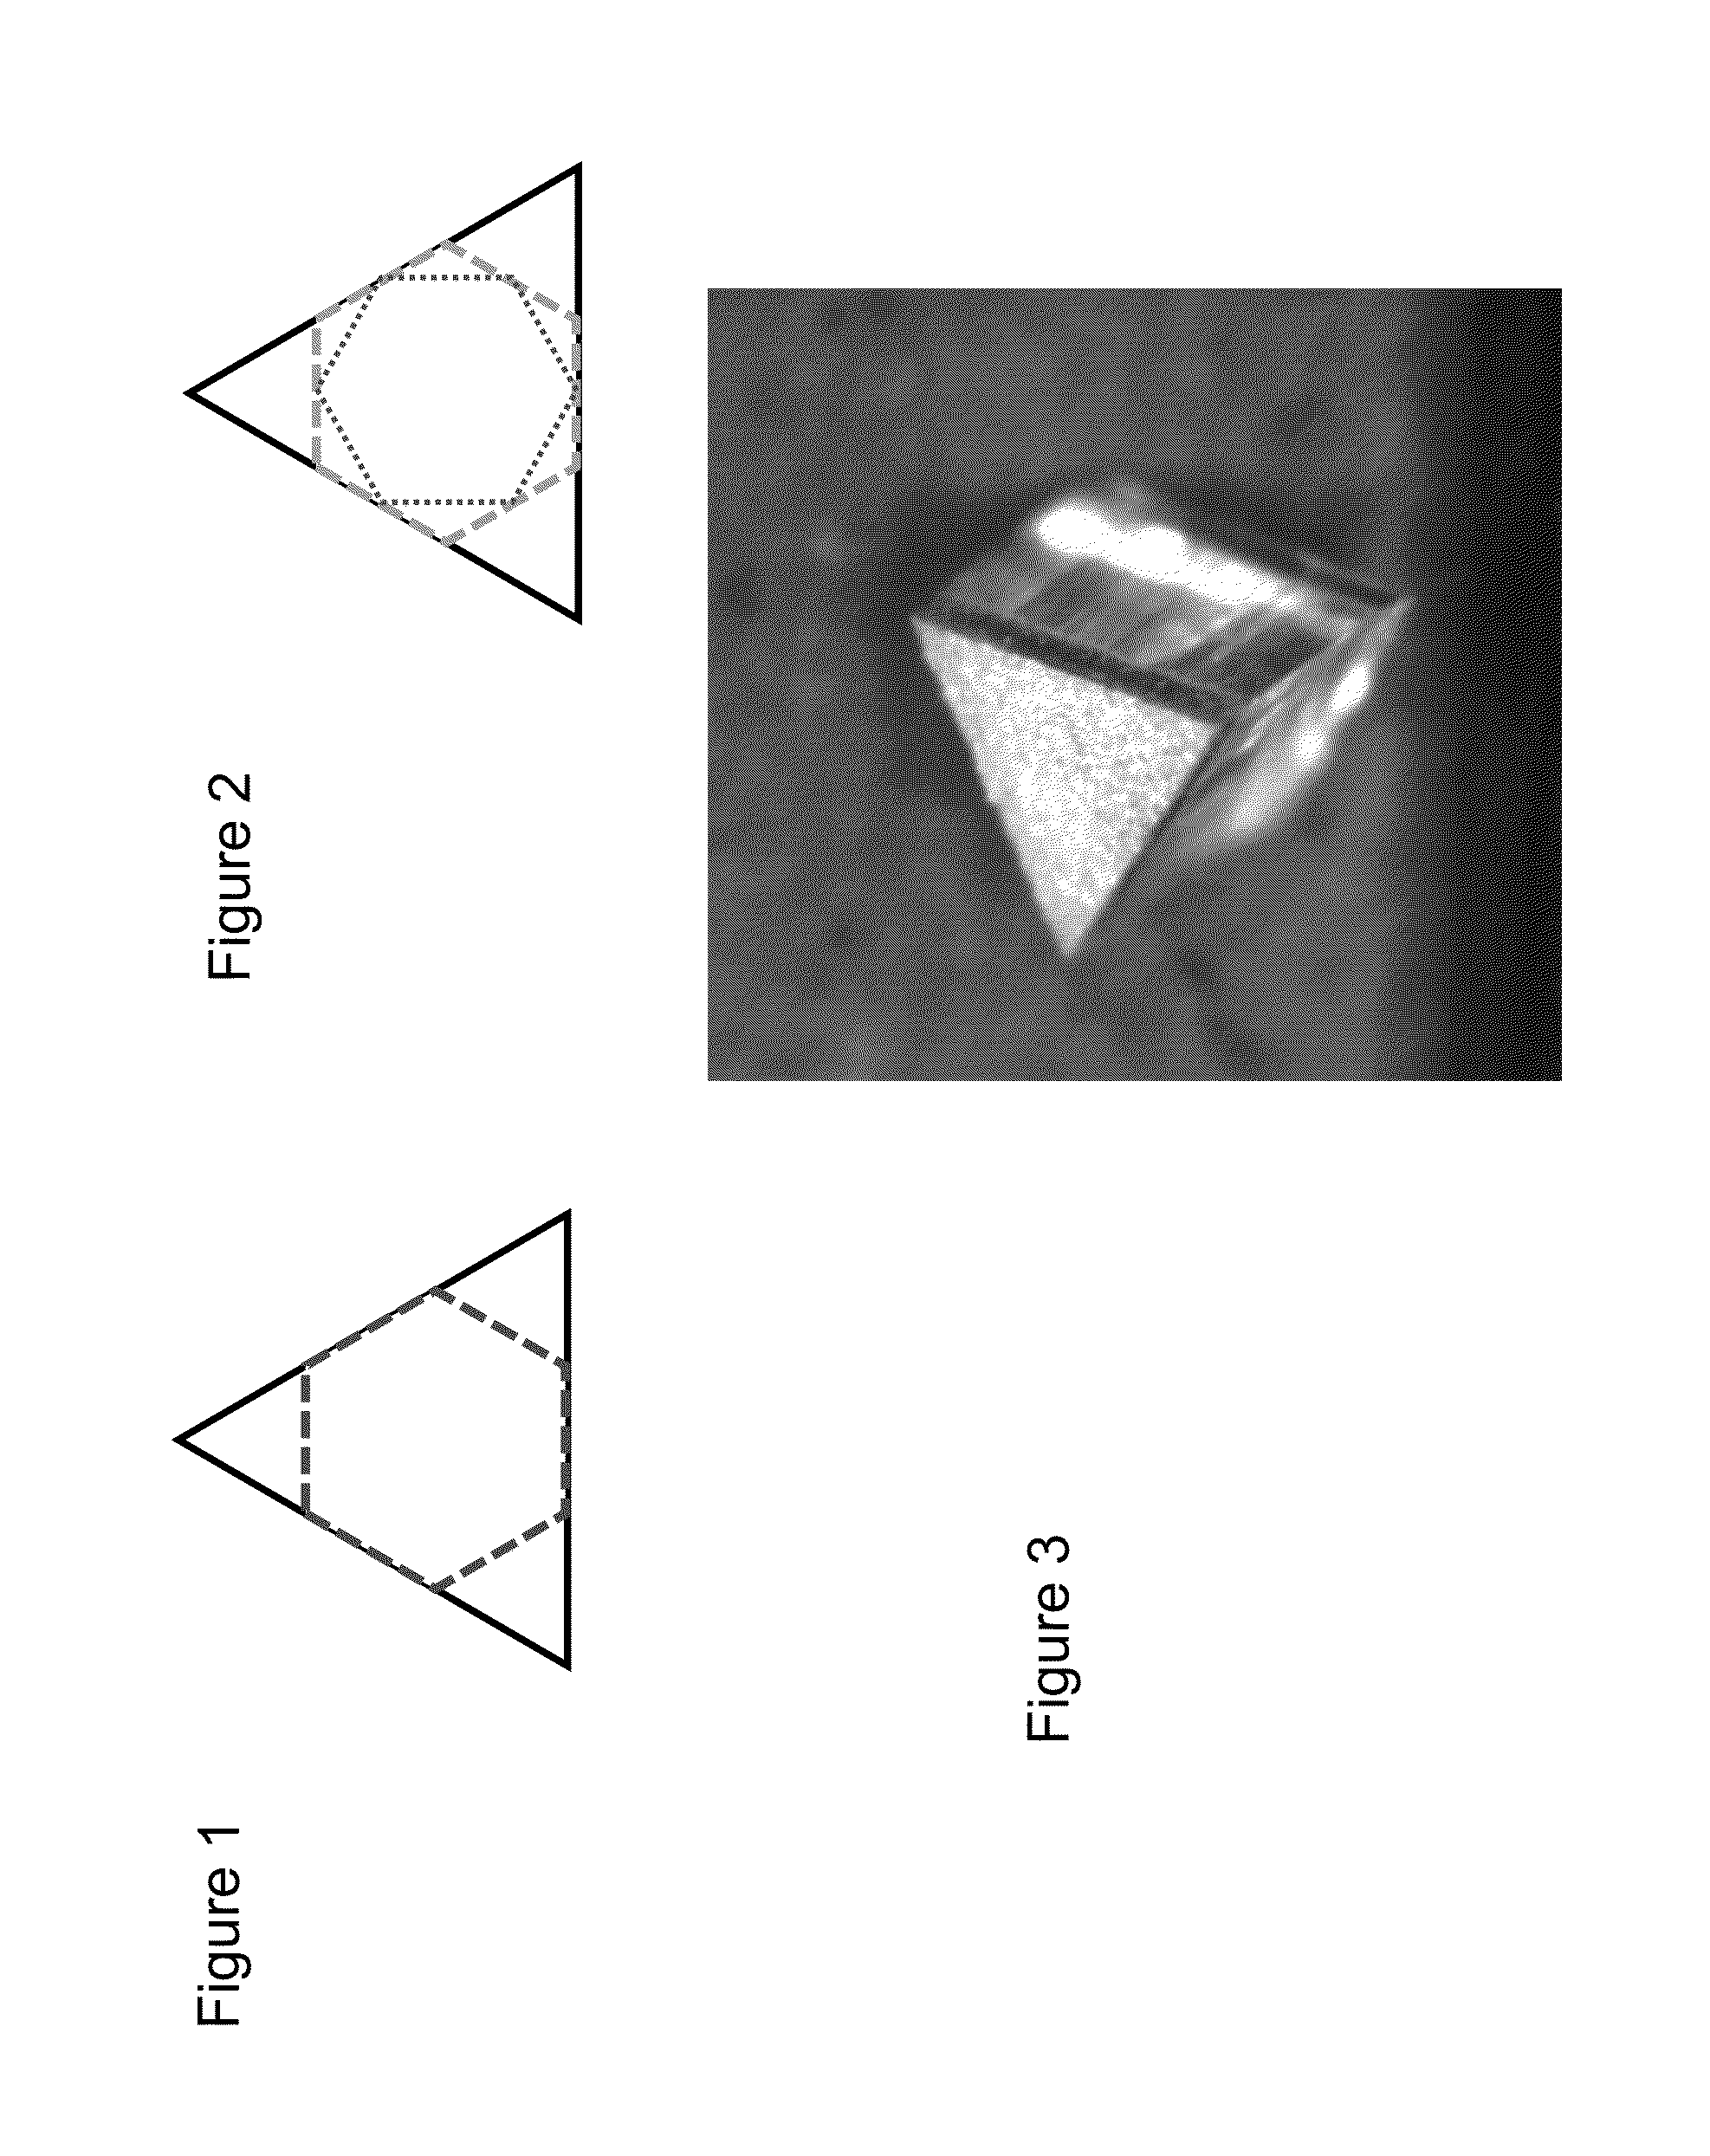 Gallium and Nitrogen Containing Triangular or Diamond-Shaped Configuration for Optical Devices